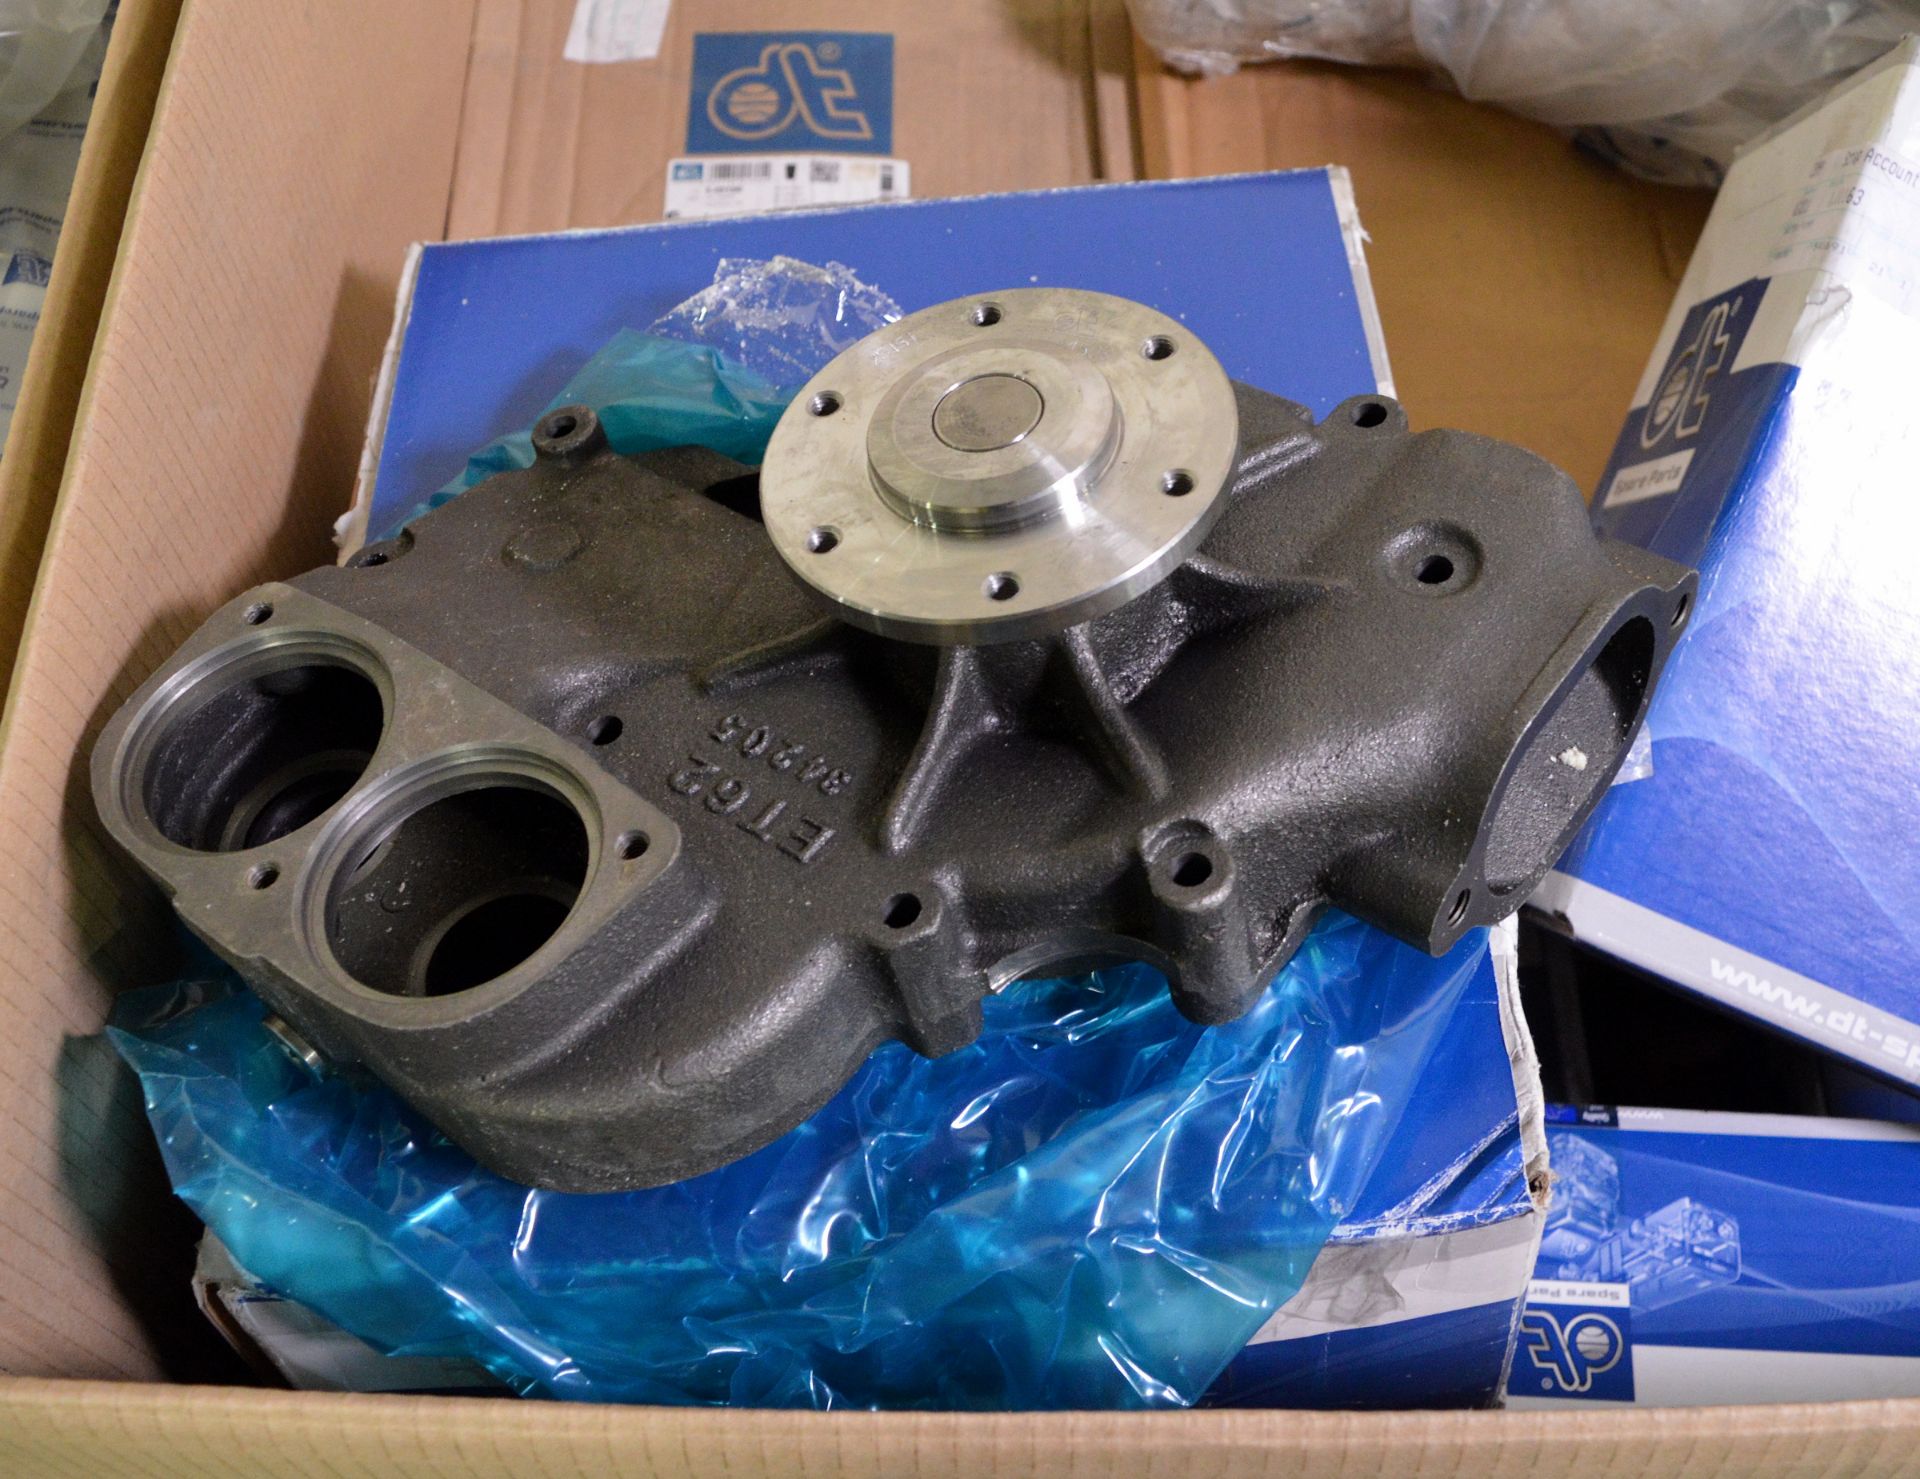 Vehicle parts - water pump, mudguard bracket, fuel filters, step well cover - see picture - Image 2 of 8